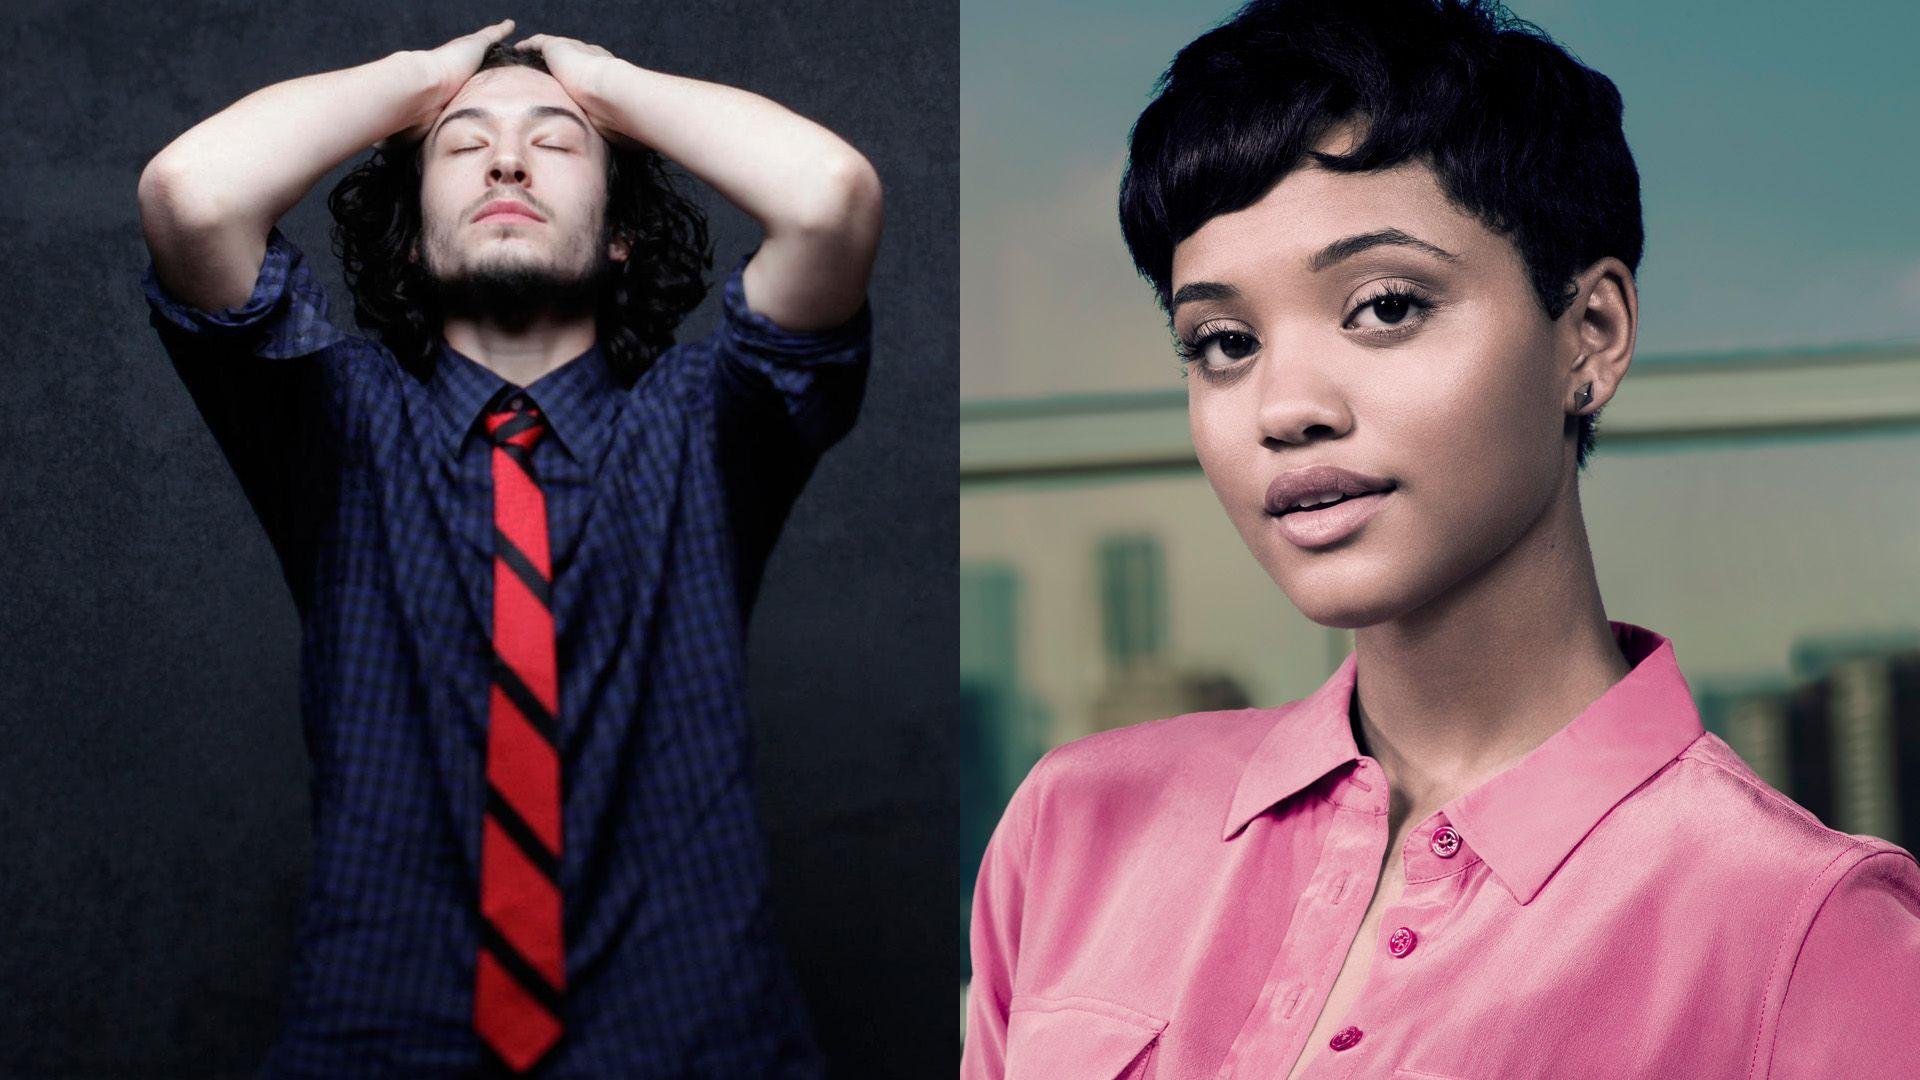 THE FLASH Stars Ezra Miller and Kiersey Clemons Comment on